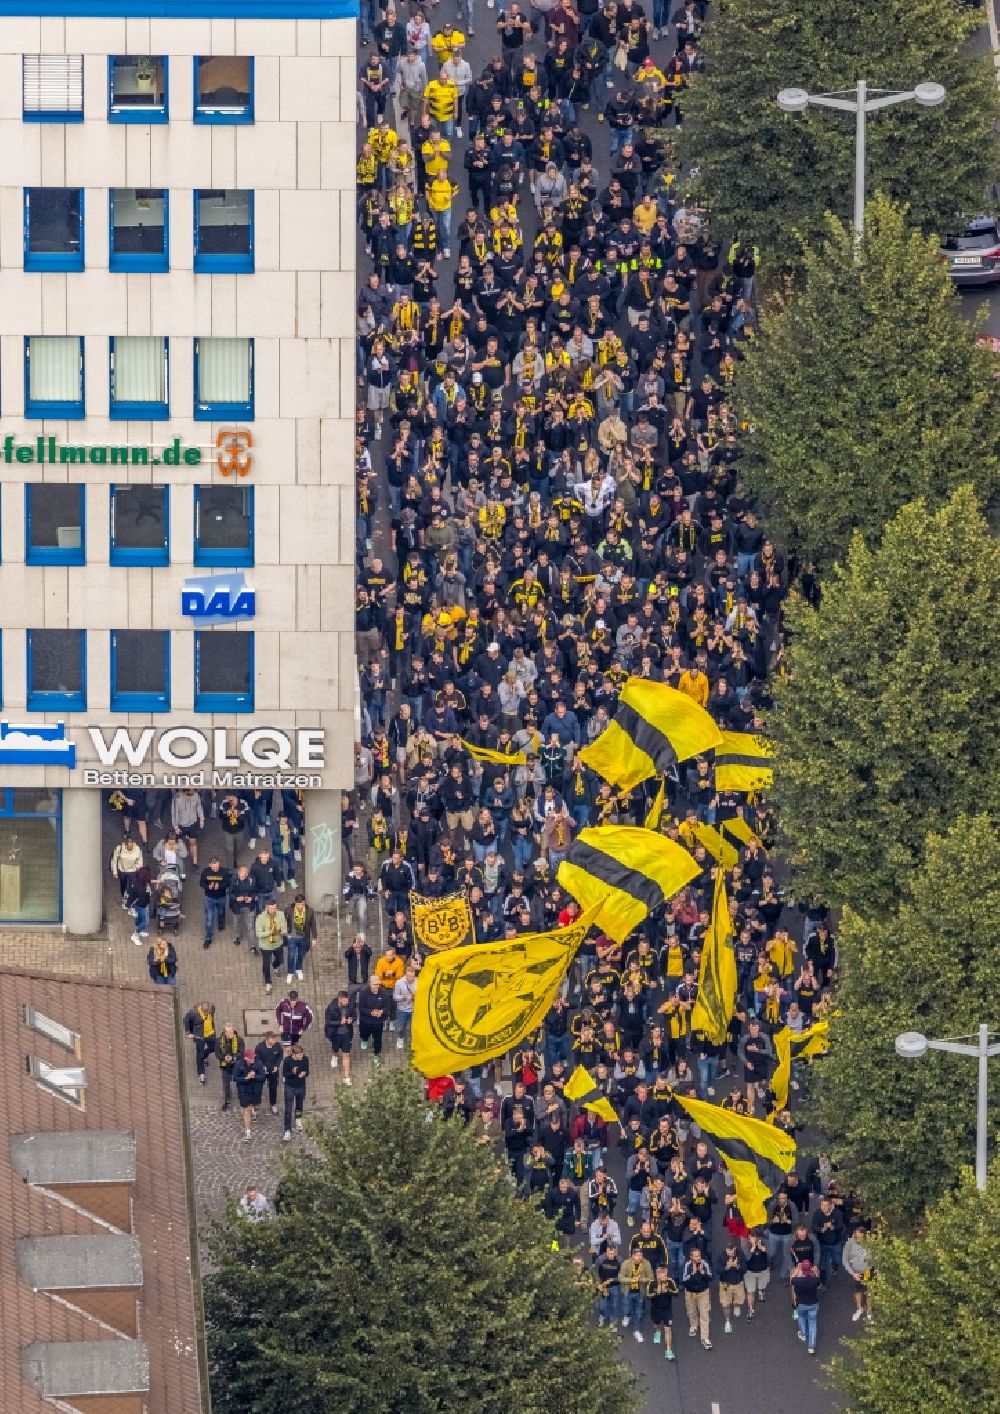 Dortmund from above - Participants - fans of the BVB football club on their way to the football match on the corner of Poststrasse and Hohe Strasse in Dortmund at Ruhrgebiet in the state North Rhine-Westphalia, Germany